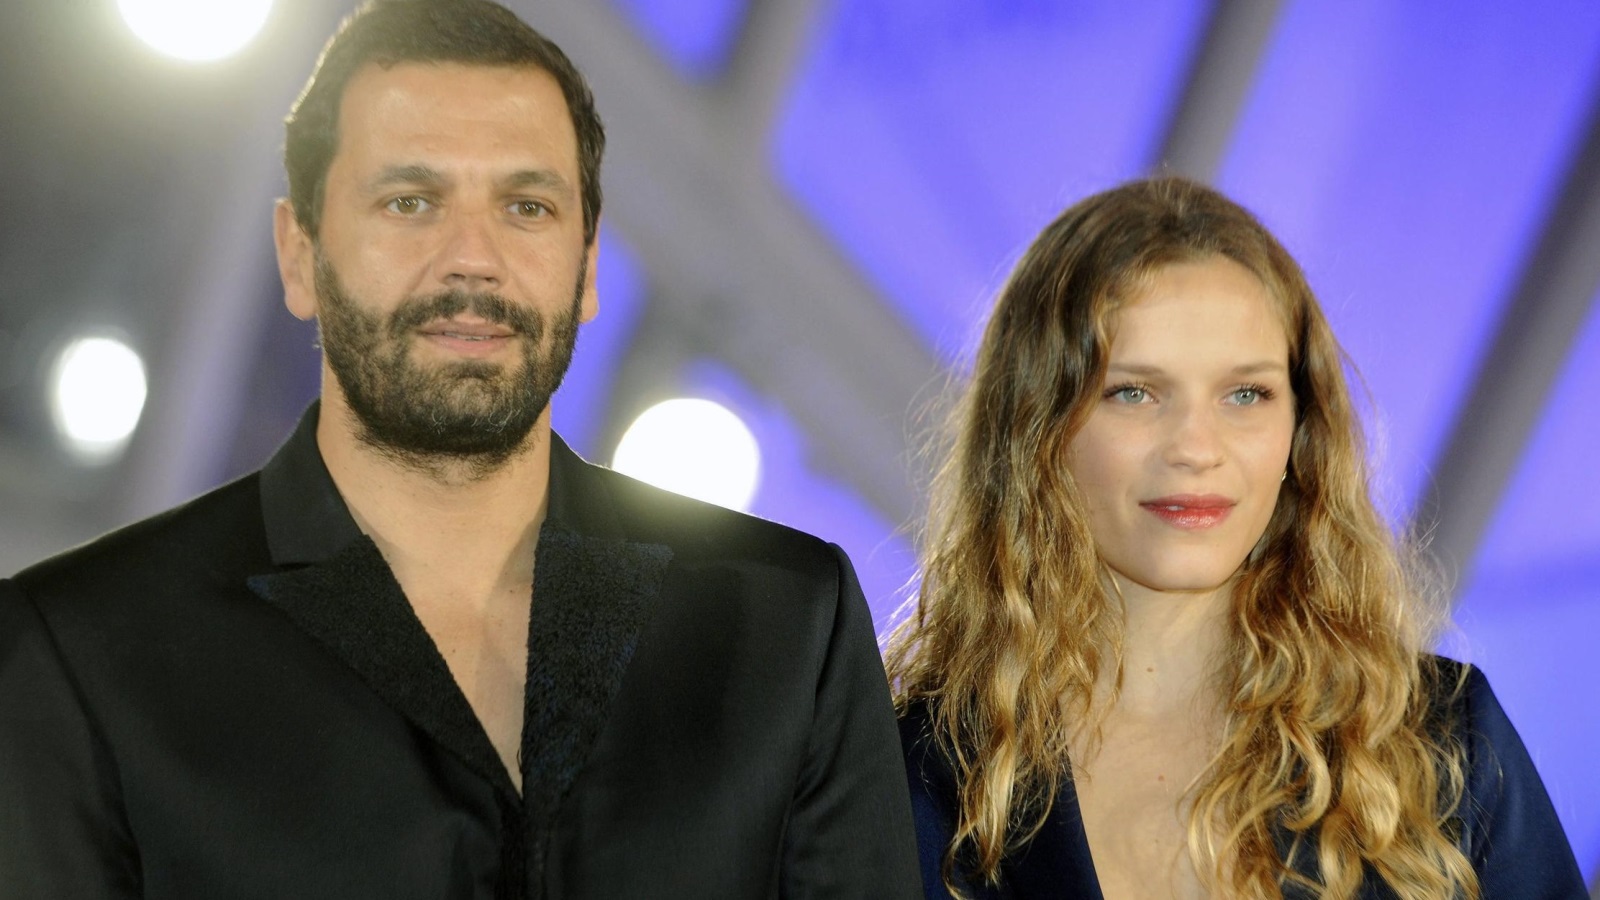 French actors Mehdi Nebbou and Margaux Chatelier (R) attend the 16th edition of the Marrakech International Film Festival, in Marrakech, Morocco, 05 December 2016. The festival runs from 02 to 10 December.